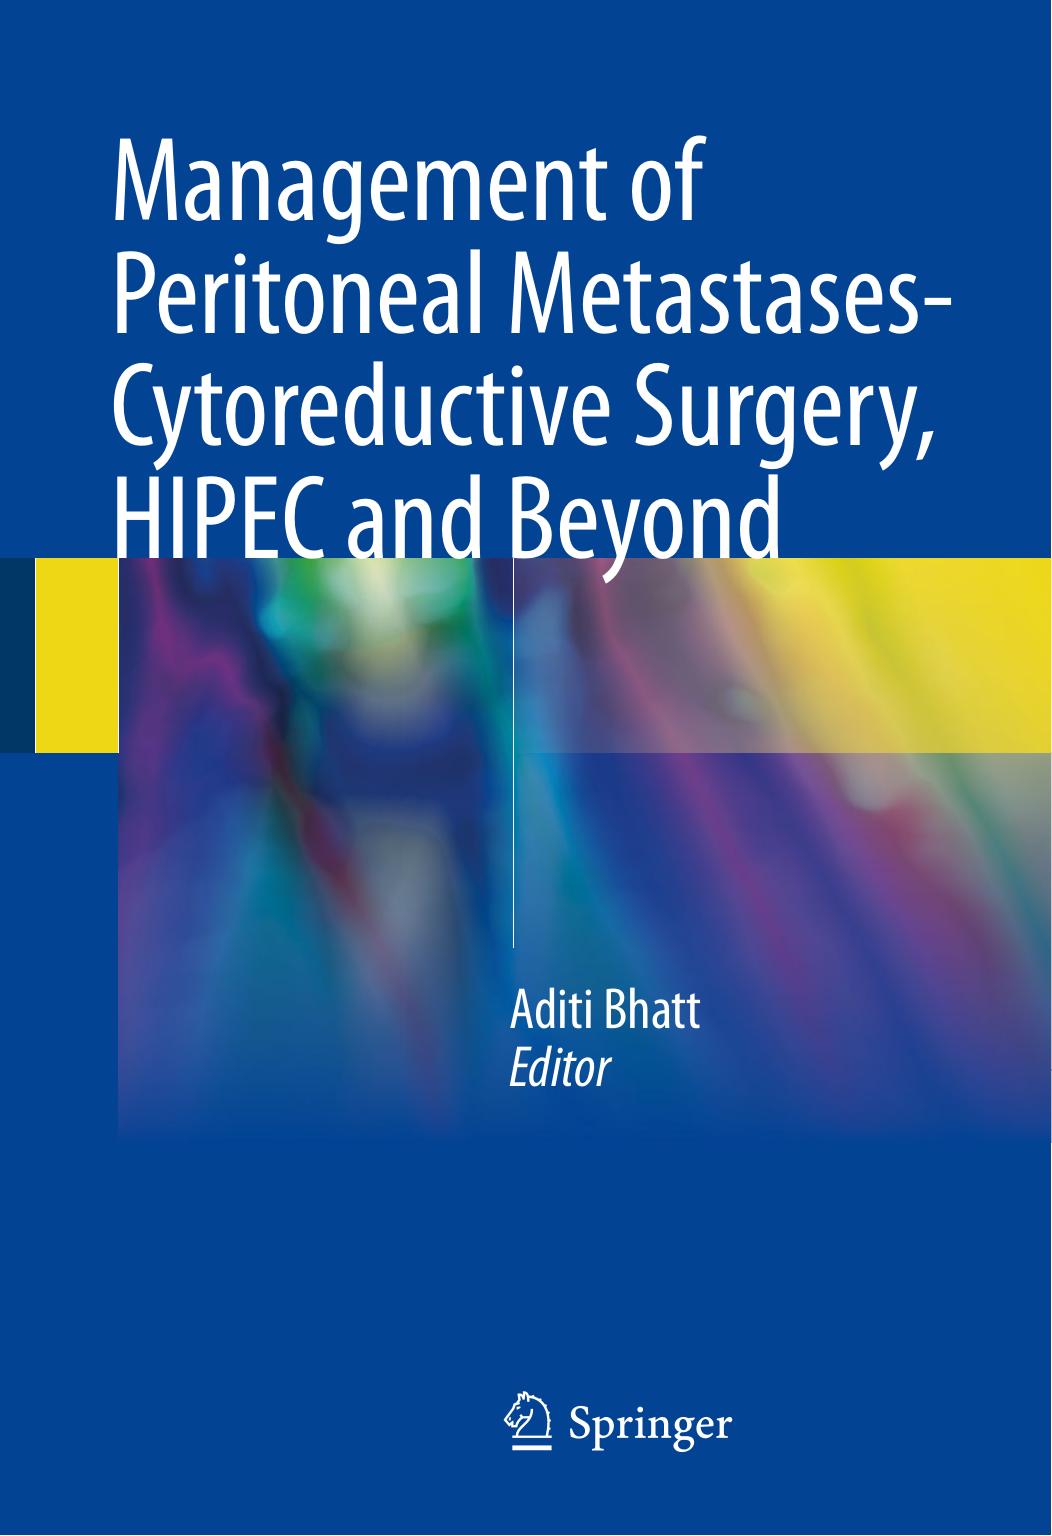 Management of Peritoneal Metastases- Cytoreductive Surgery, HIPEC and Beyond by Aditi Bhatt